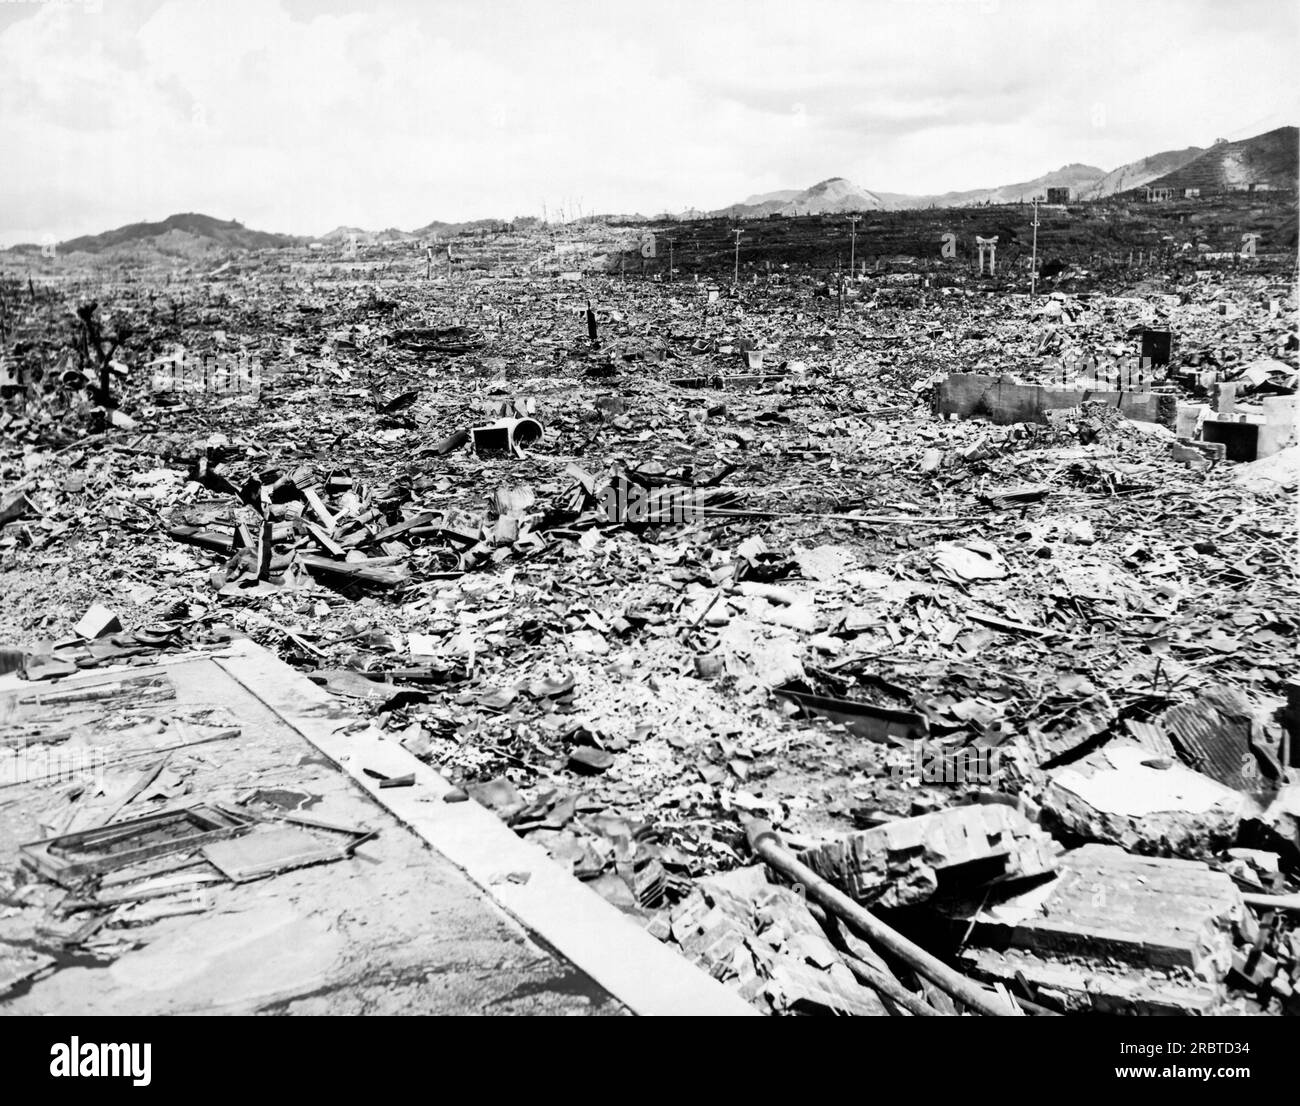 Nagasaki, Japan, September 13, 1945 The remains of Nagasaki at the epicenter a little bit more than a month after the atomic bomb blast. Stock Photo